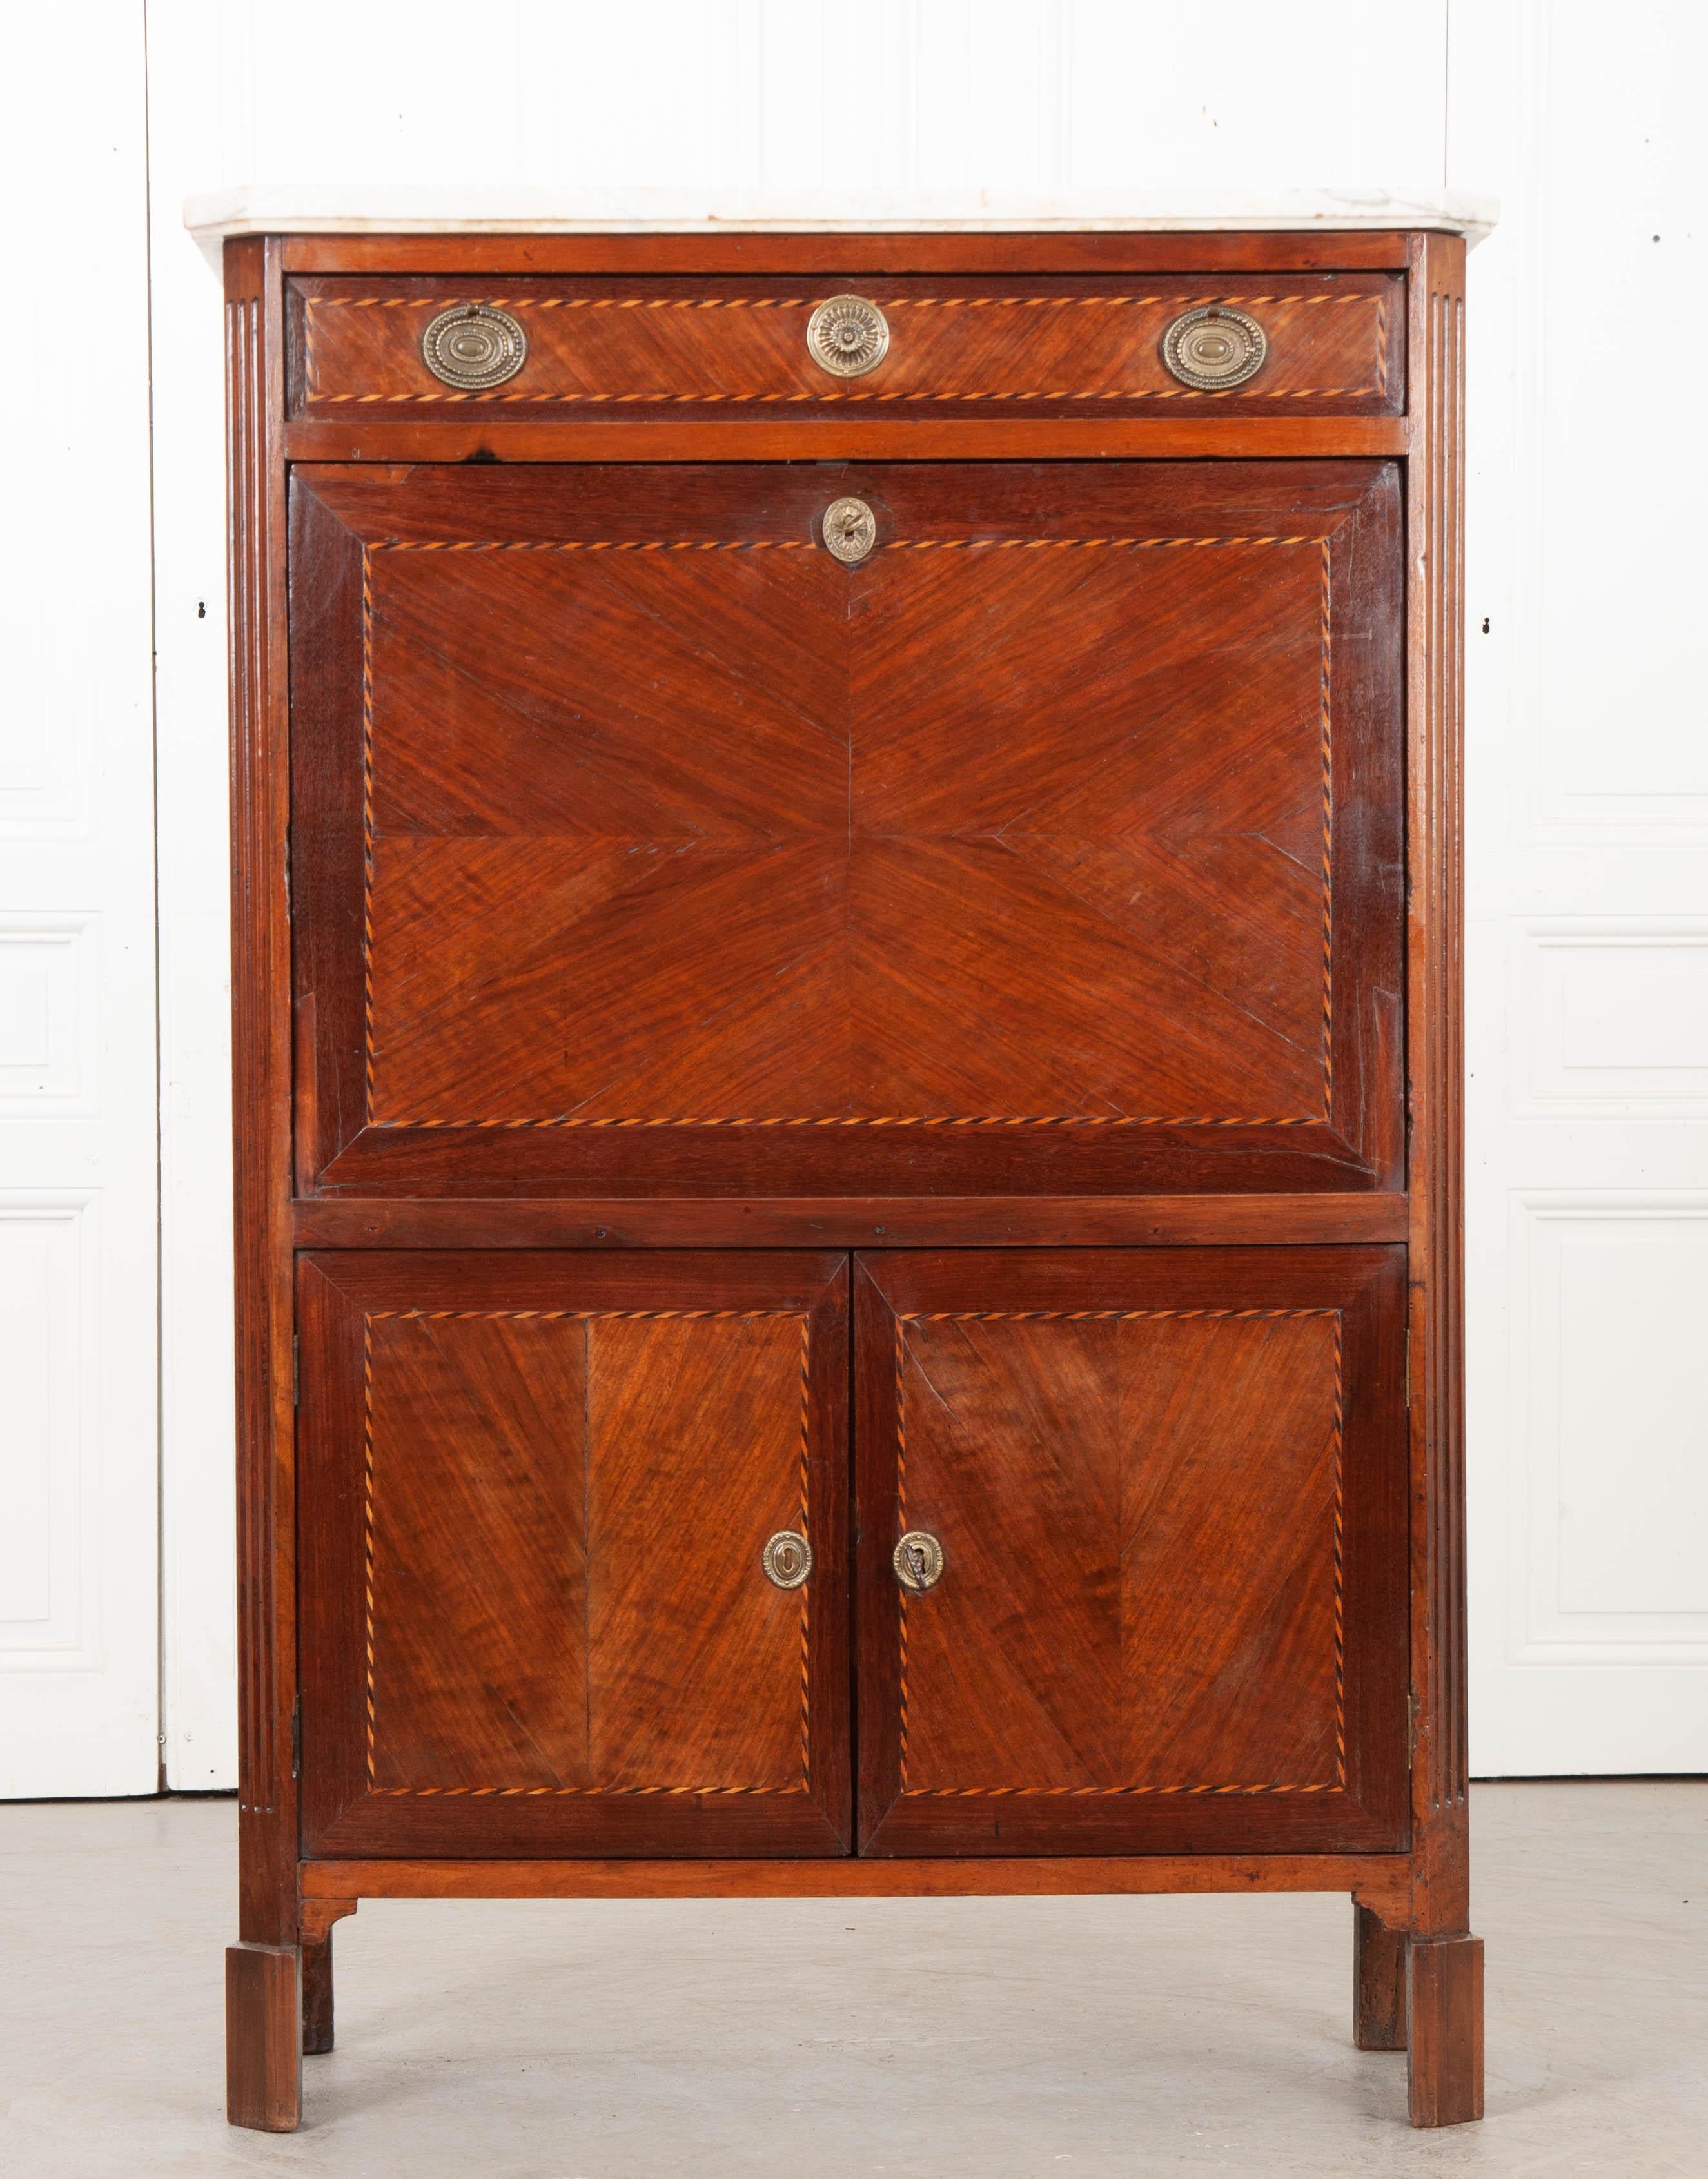 Inlaid details grace many of this 19th century French secretary’s surfaces. Both the exterior doors and drawers are trimmed in satinwood and mahogany, done in a twist-motif. The interior drawer fronts have satinwood inlay, laid into the wood in